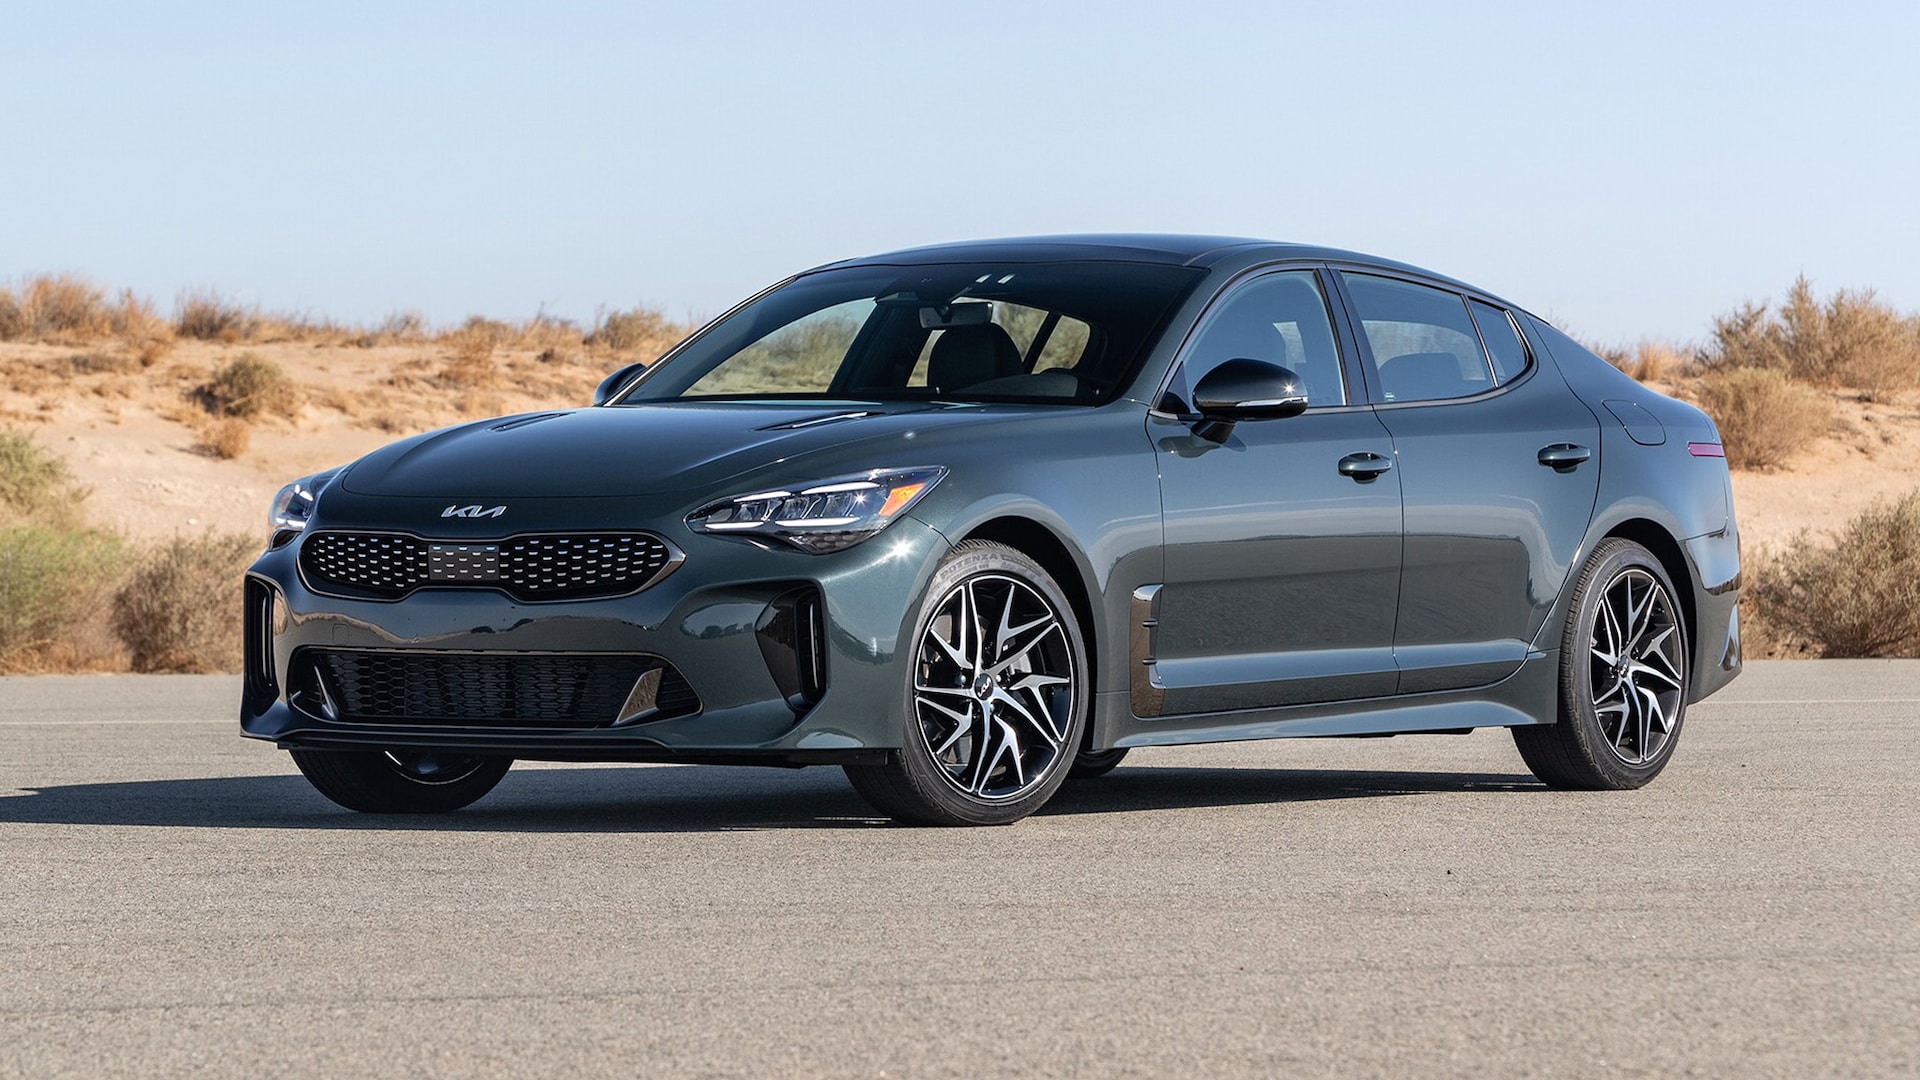 2023 Kia Stinger Prices, Reviews, and Photos - MotorTrend